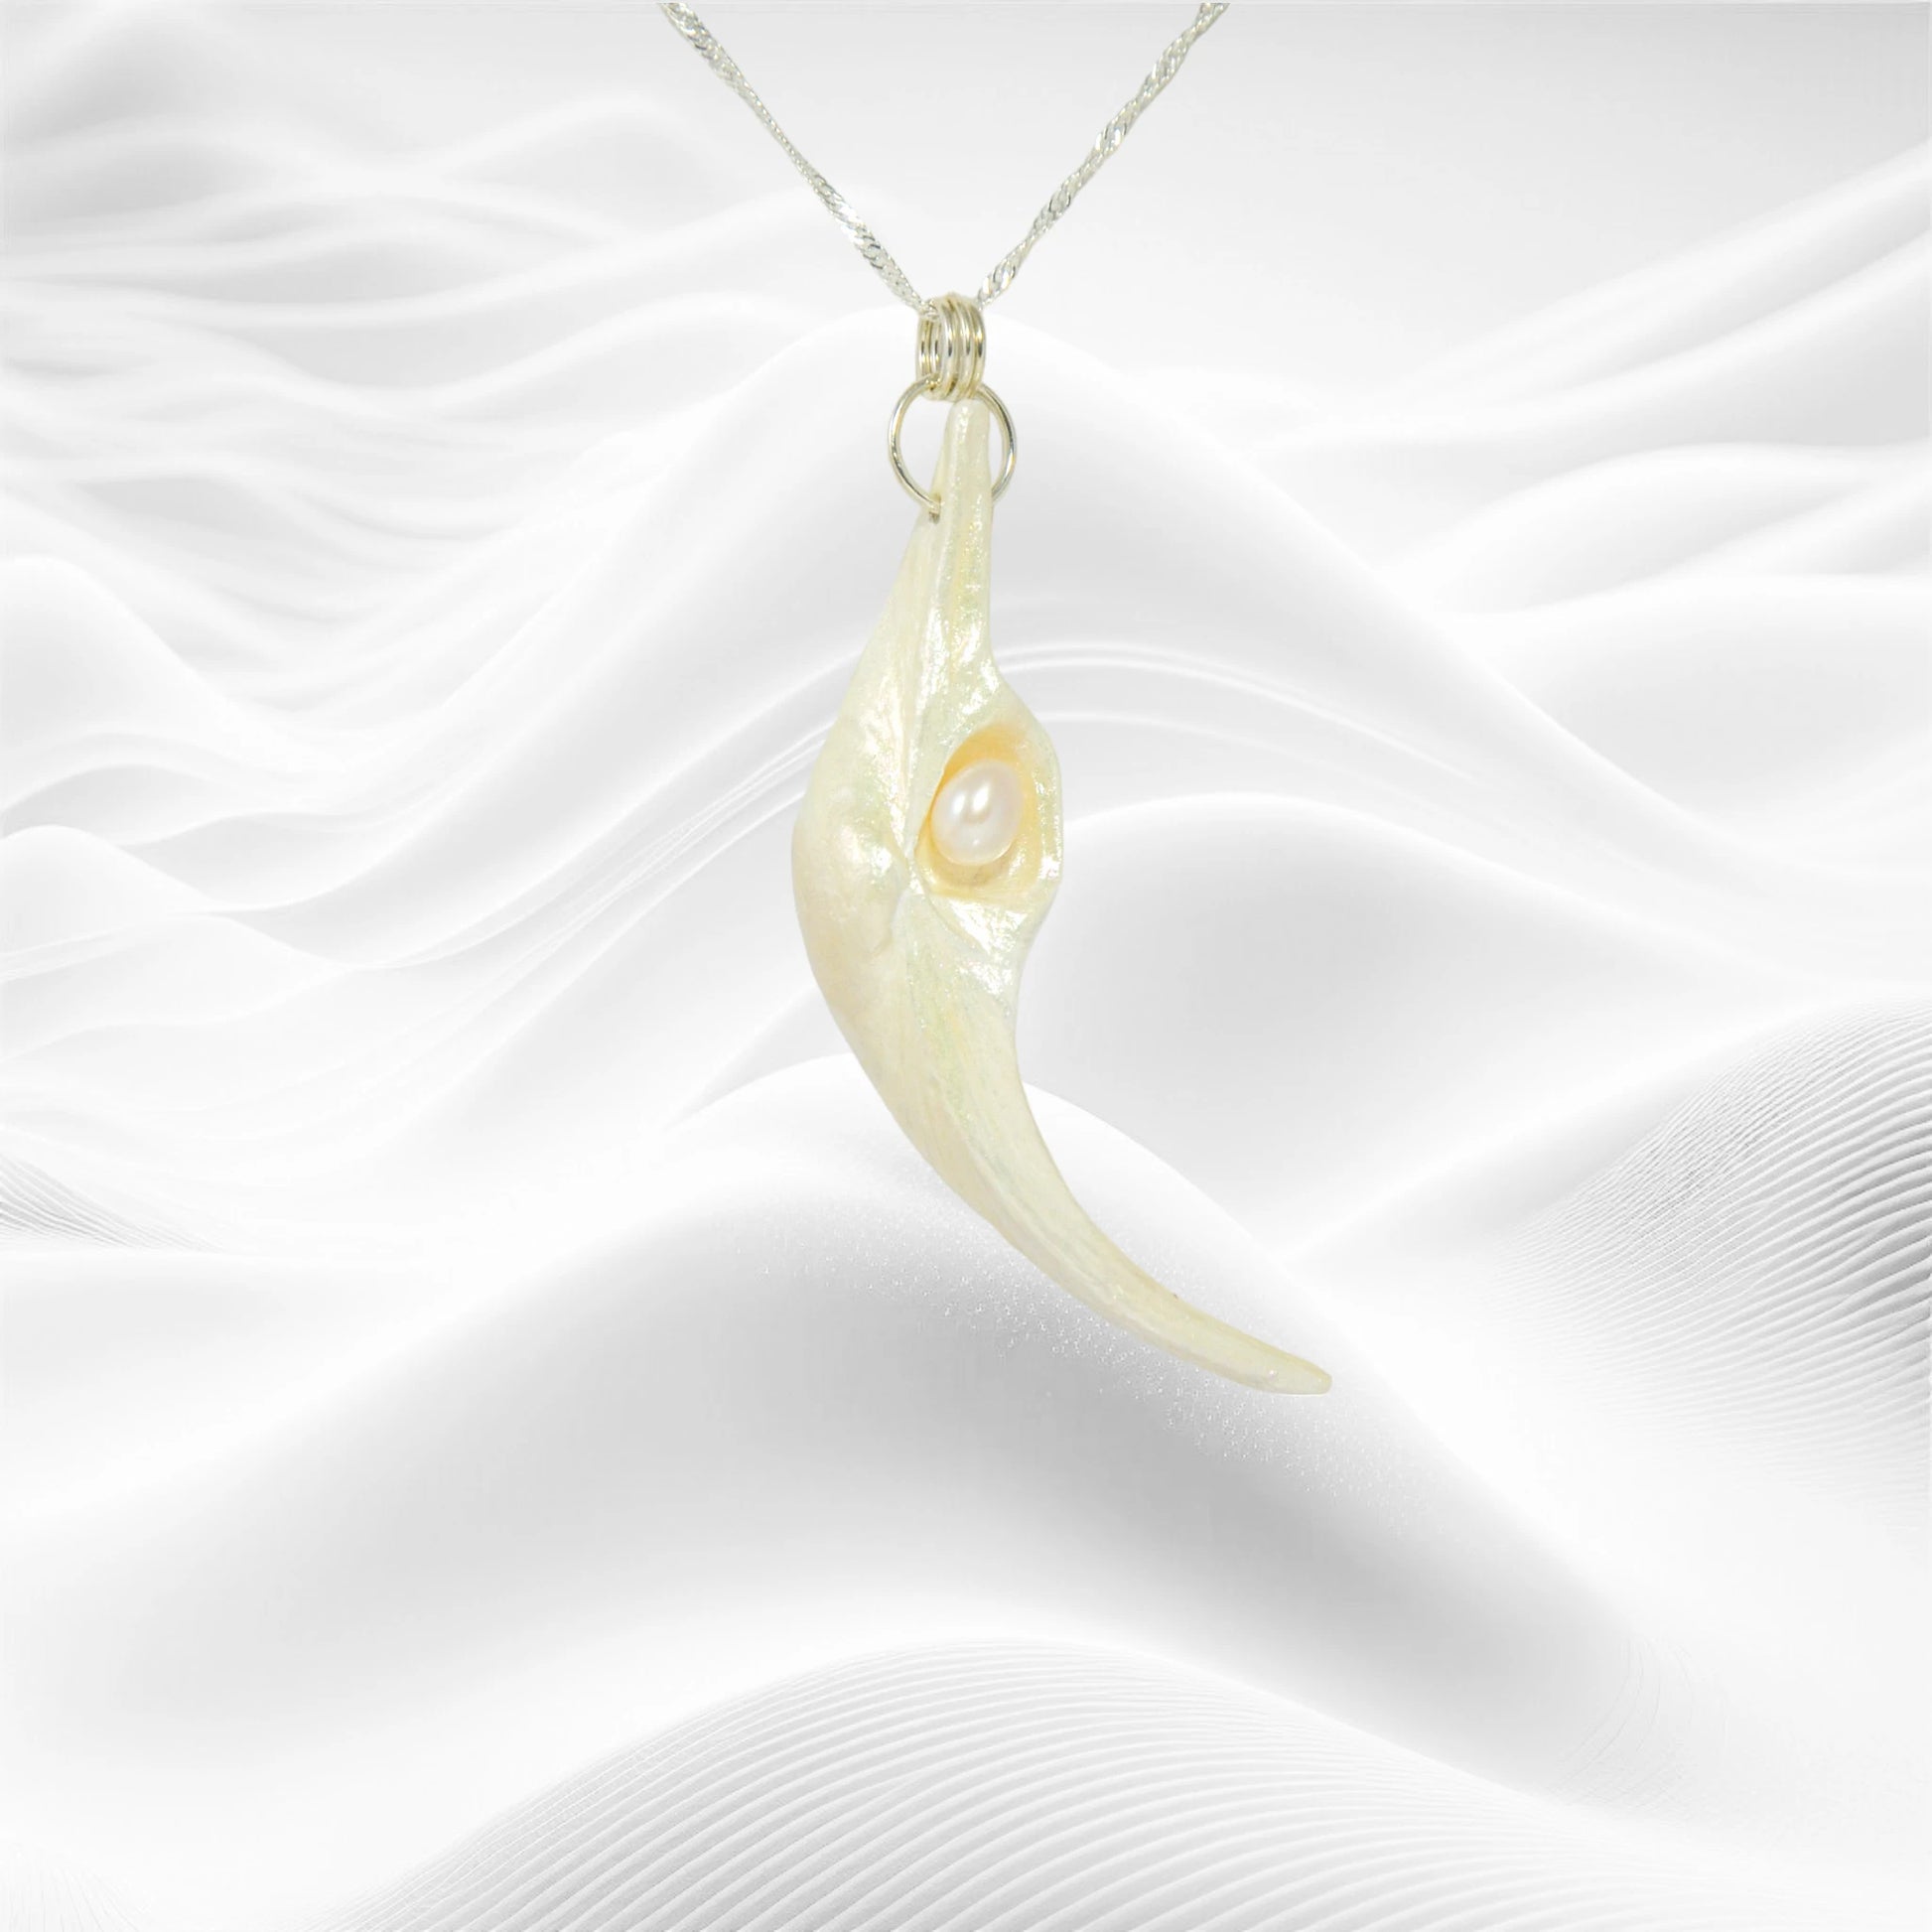 Jupiter is a natural seashell pendant with a real freshwater pearl.